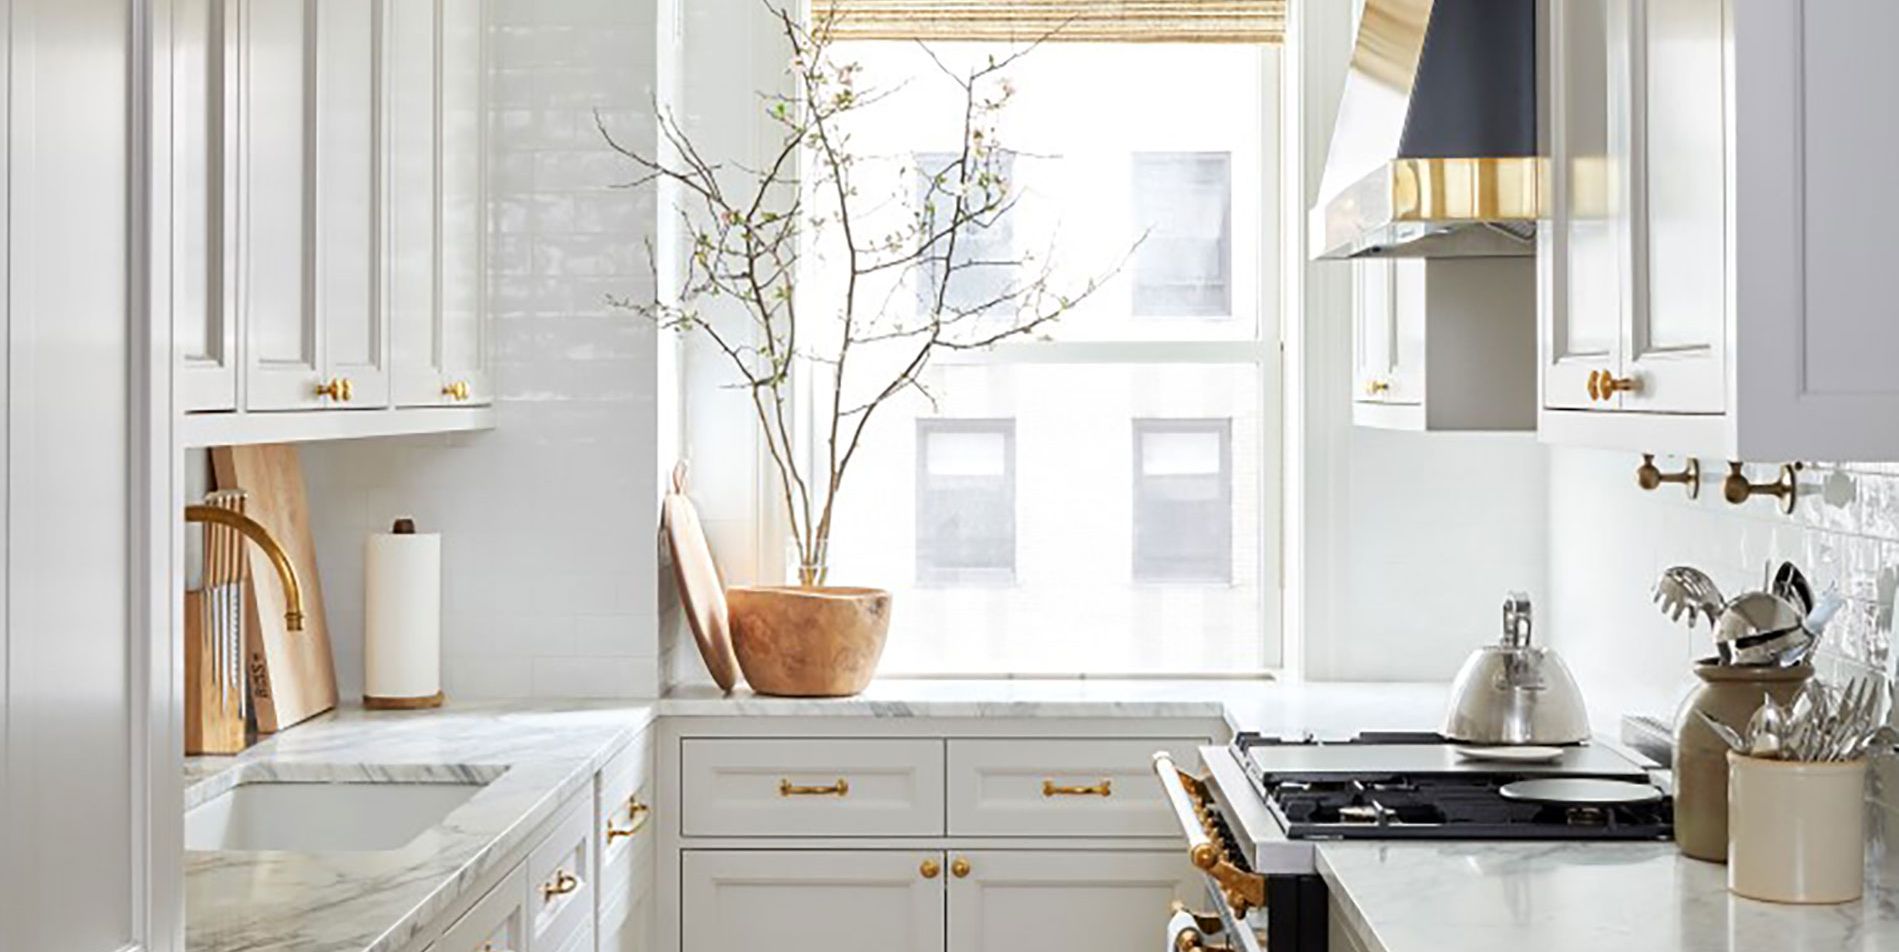 Small white kitchen ideas – 10 design tips for light and bright kitchens